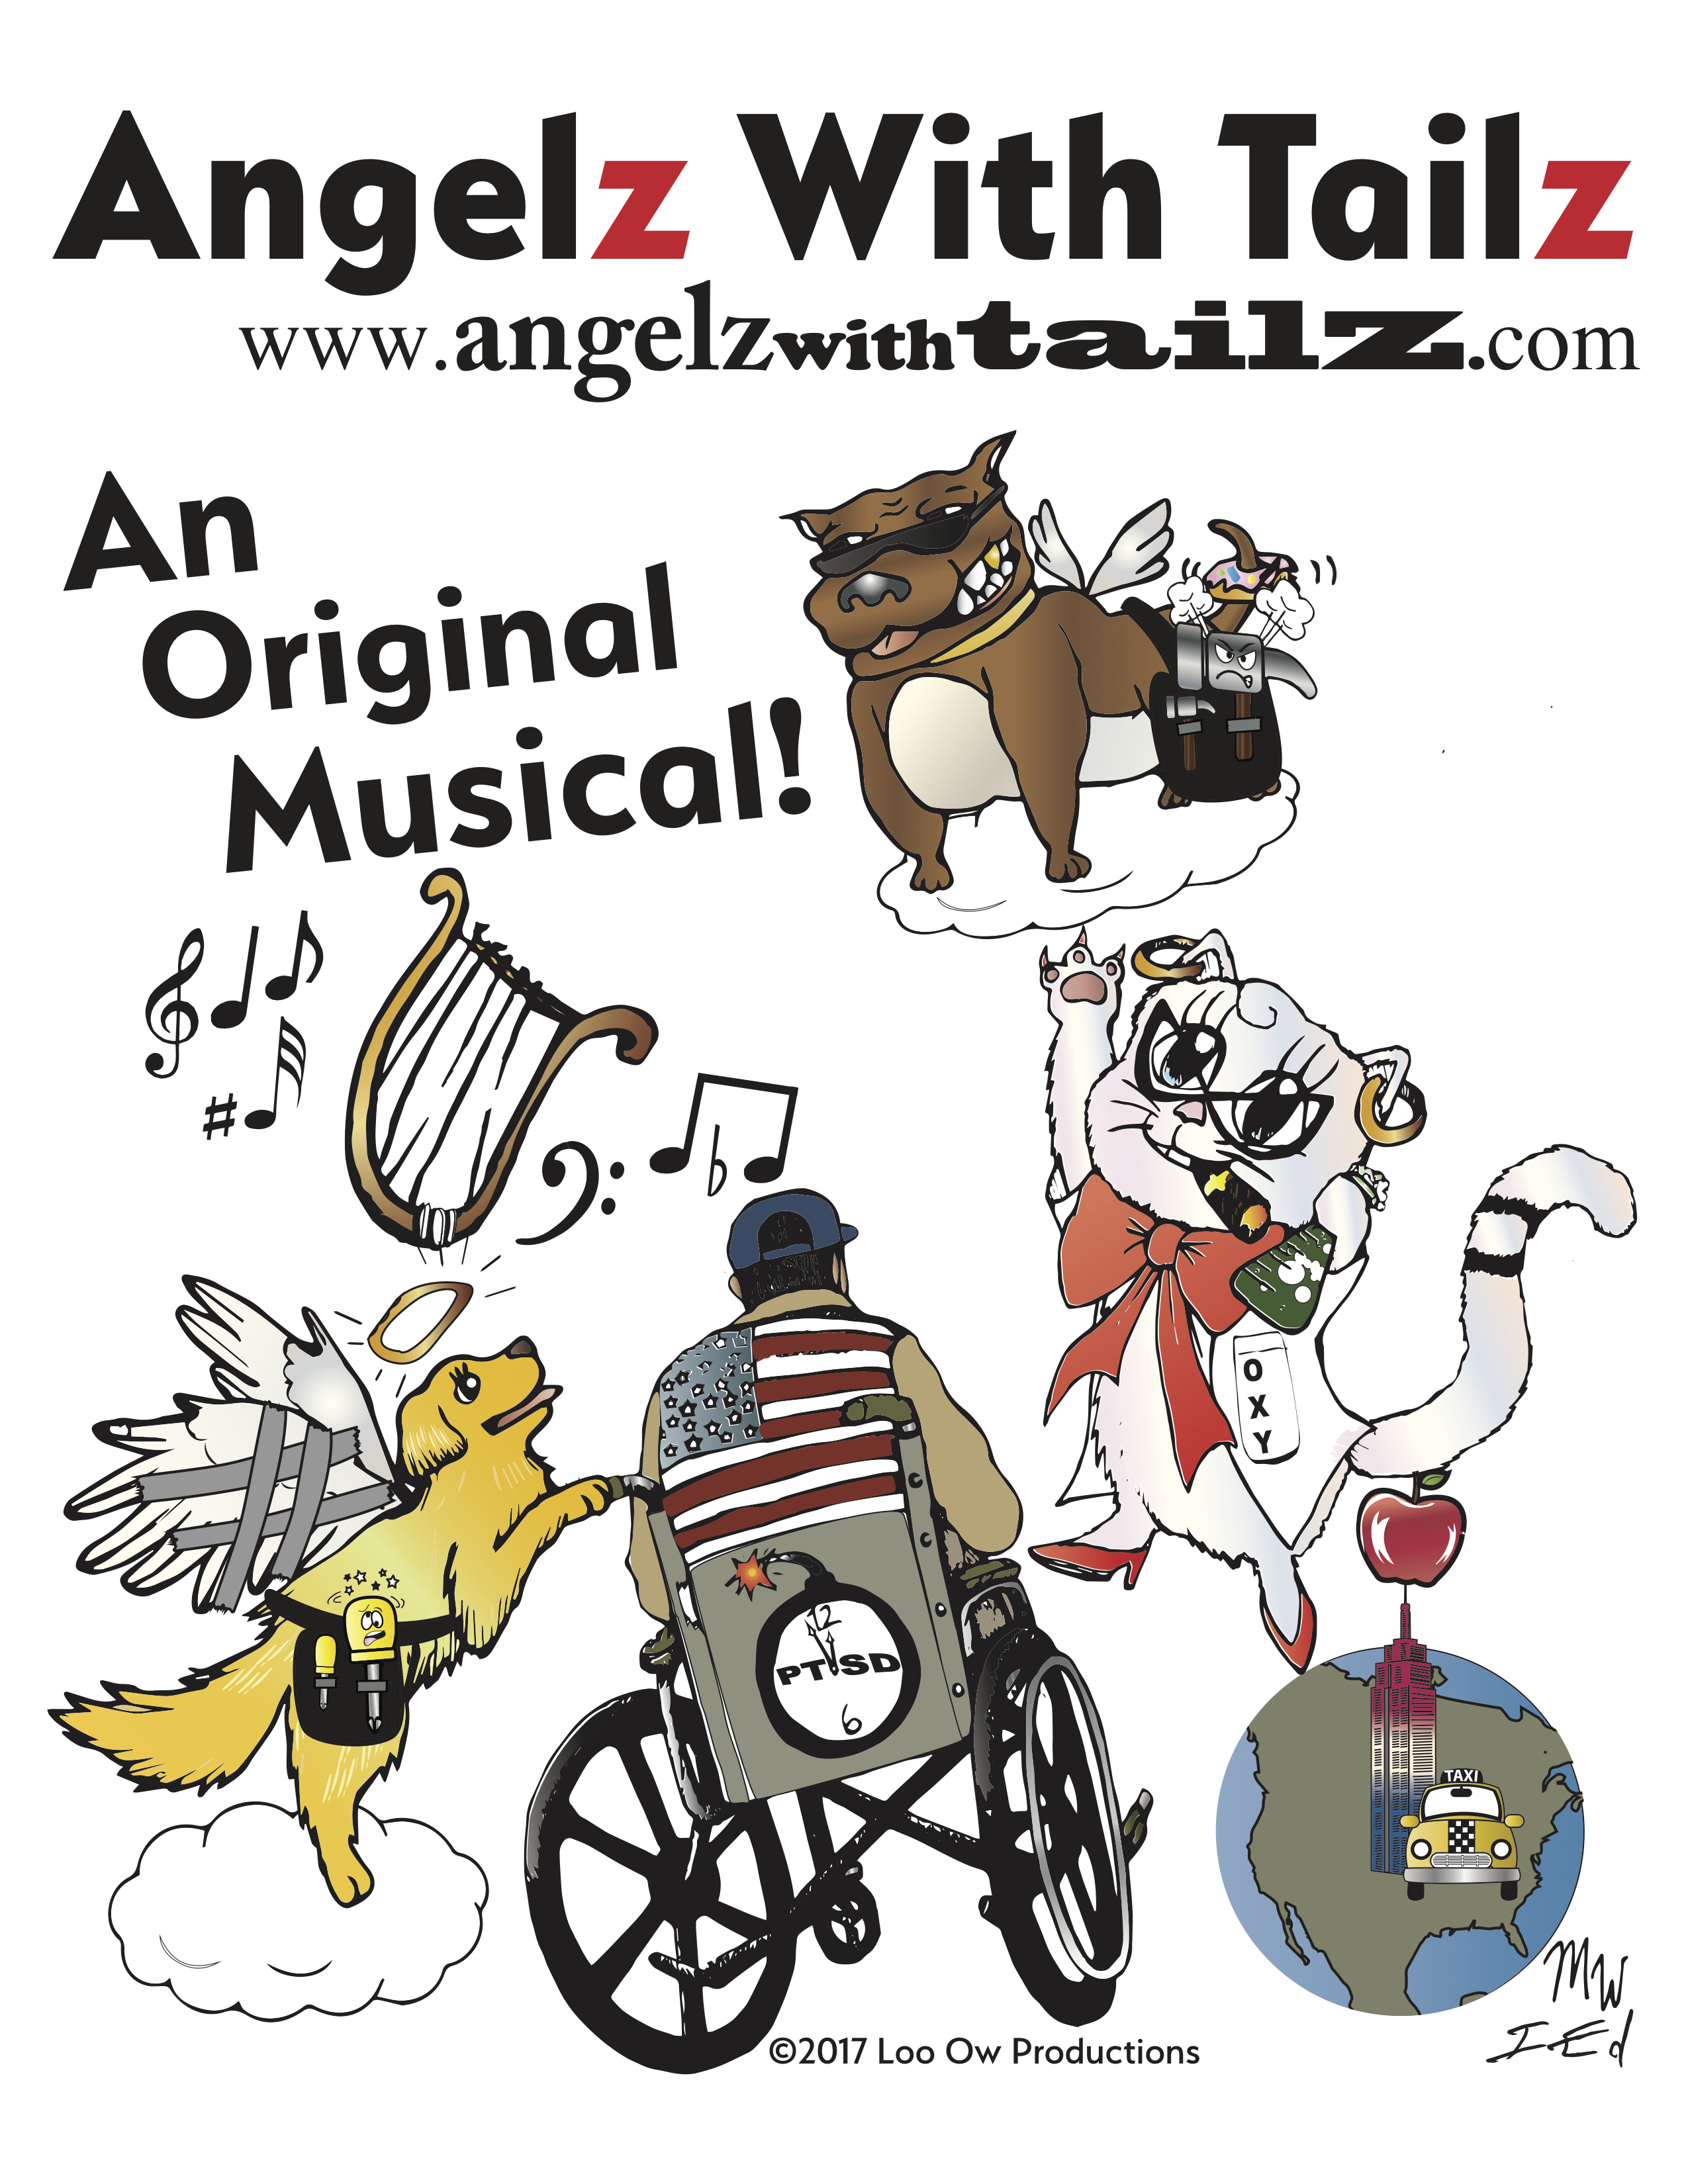 This picture will be printed on a promotional t-shirt to help raise funds for the development of the musical workshop. A donation will be made to the Wounded Warrior Project. It will be a collector’s item. Subscribe to the Facebook page and let me know if you would like to order a t-shirt. I will have a drawing of the Angels who bought a t-shirt and they will win a ticket to the premiere. The more t-shirts you buy the better your odds!